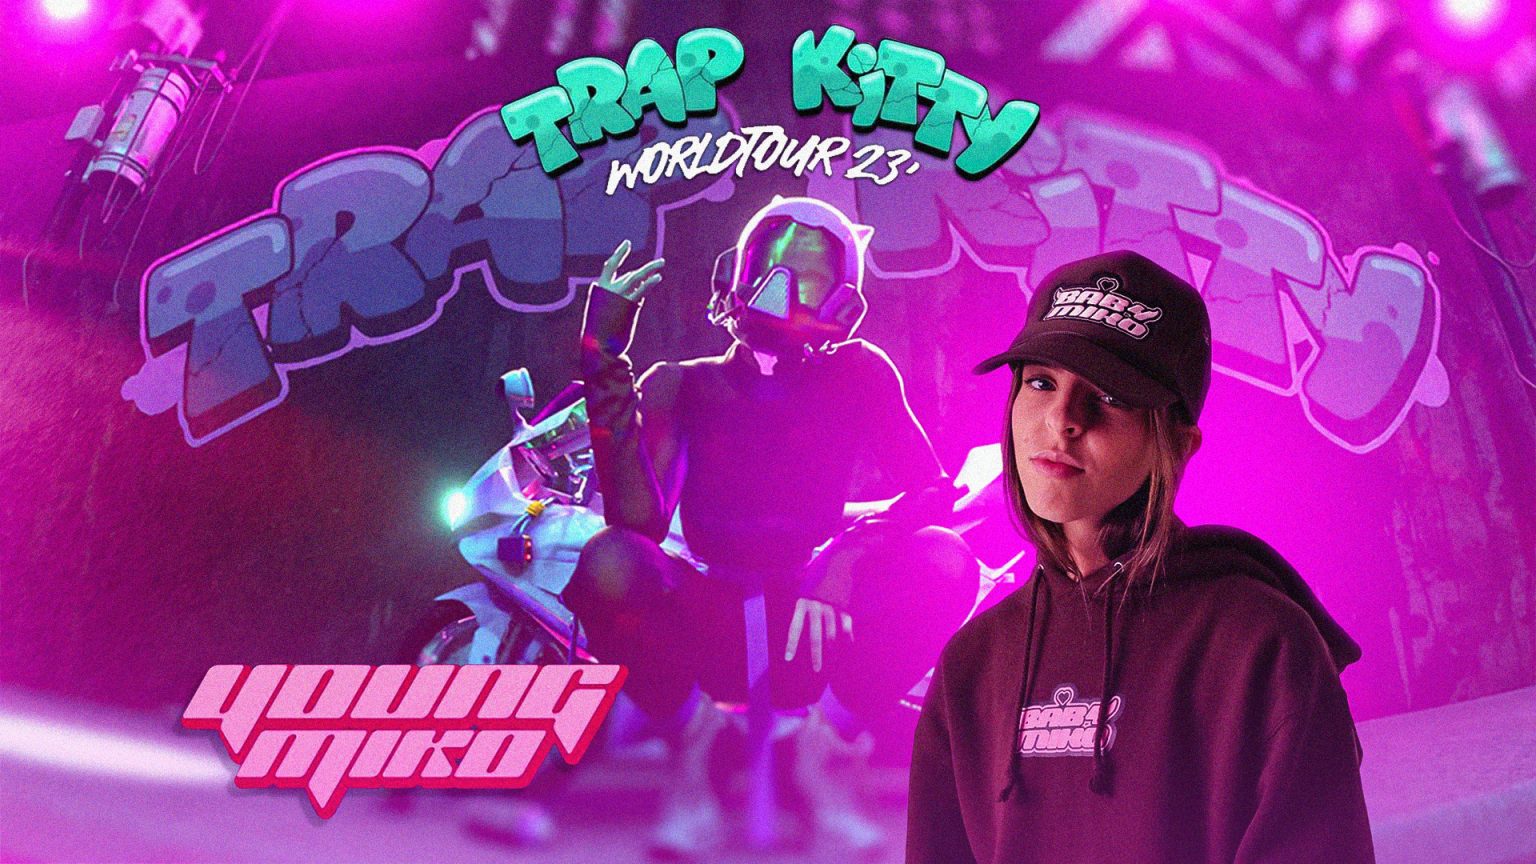 trap kitty world tour tickets at youngmiko.com